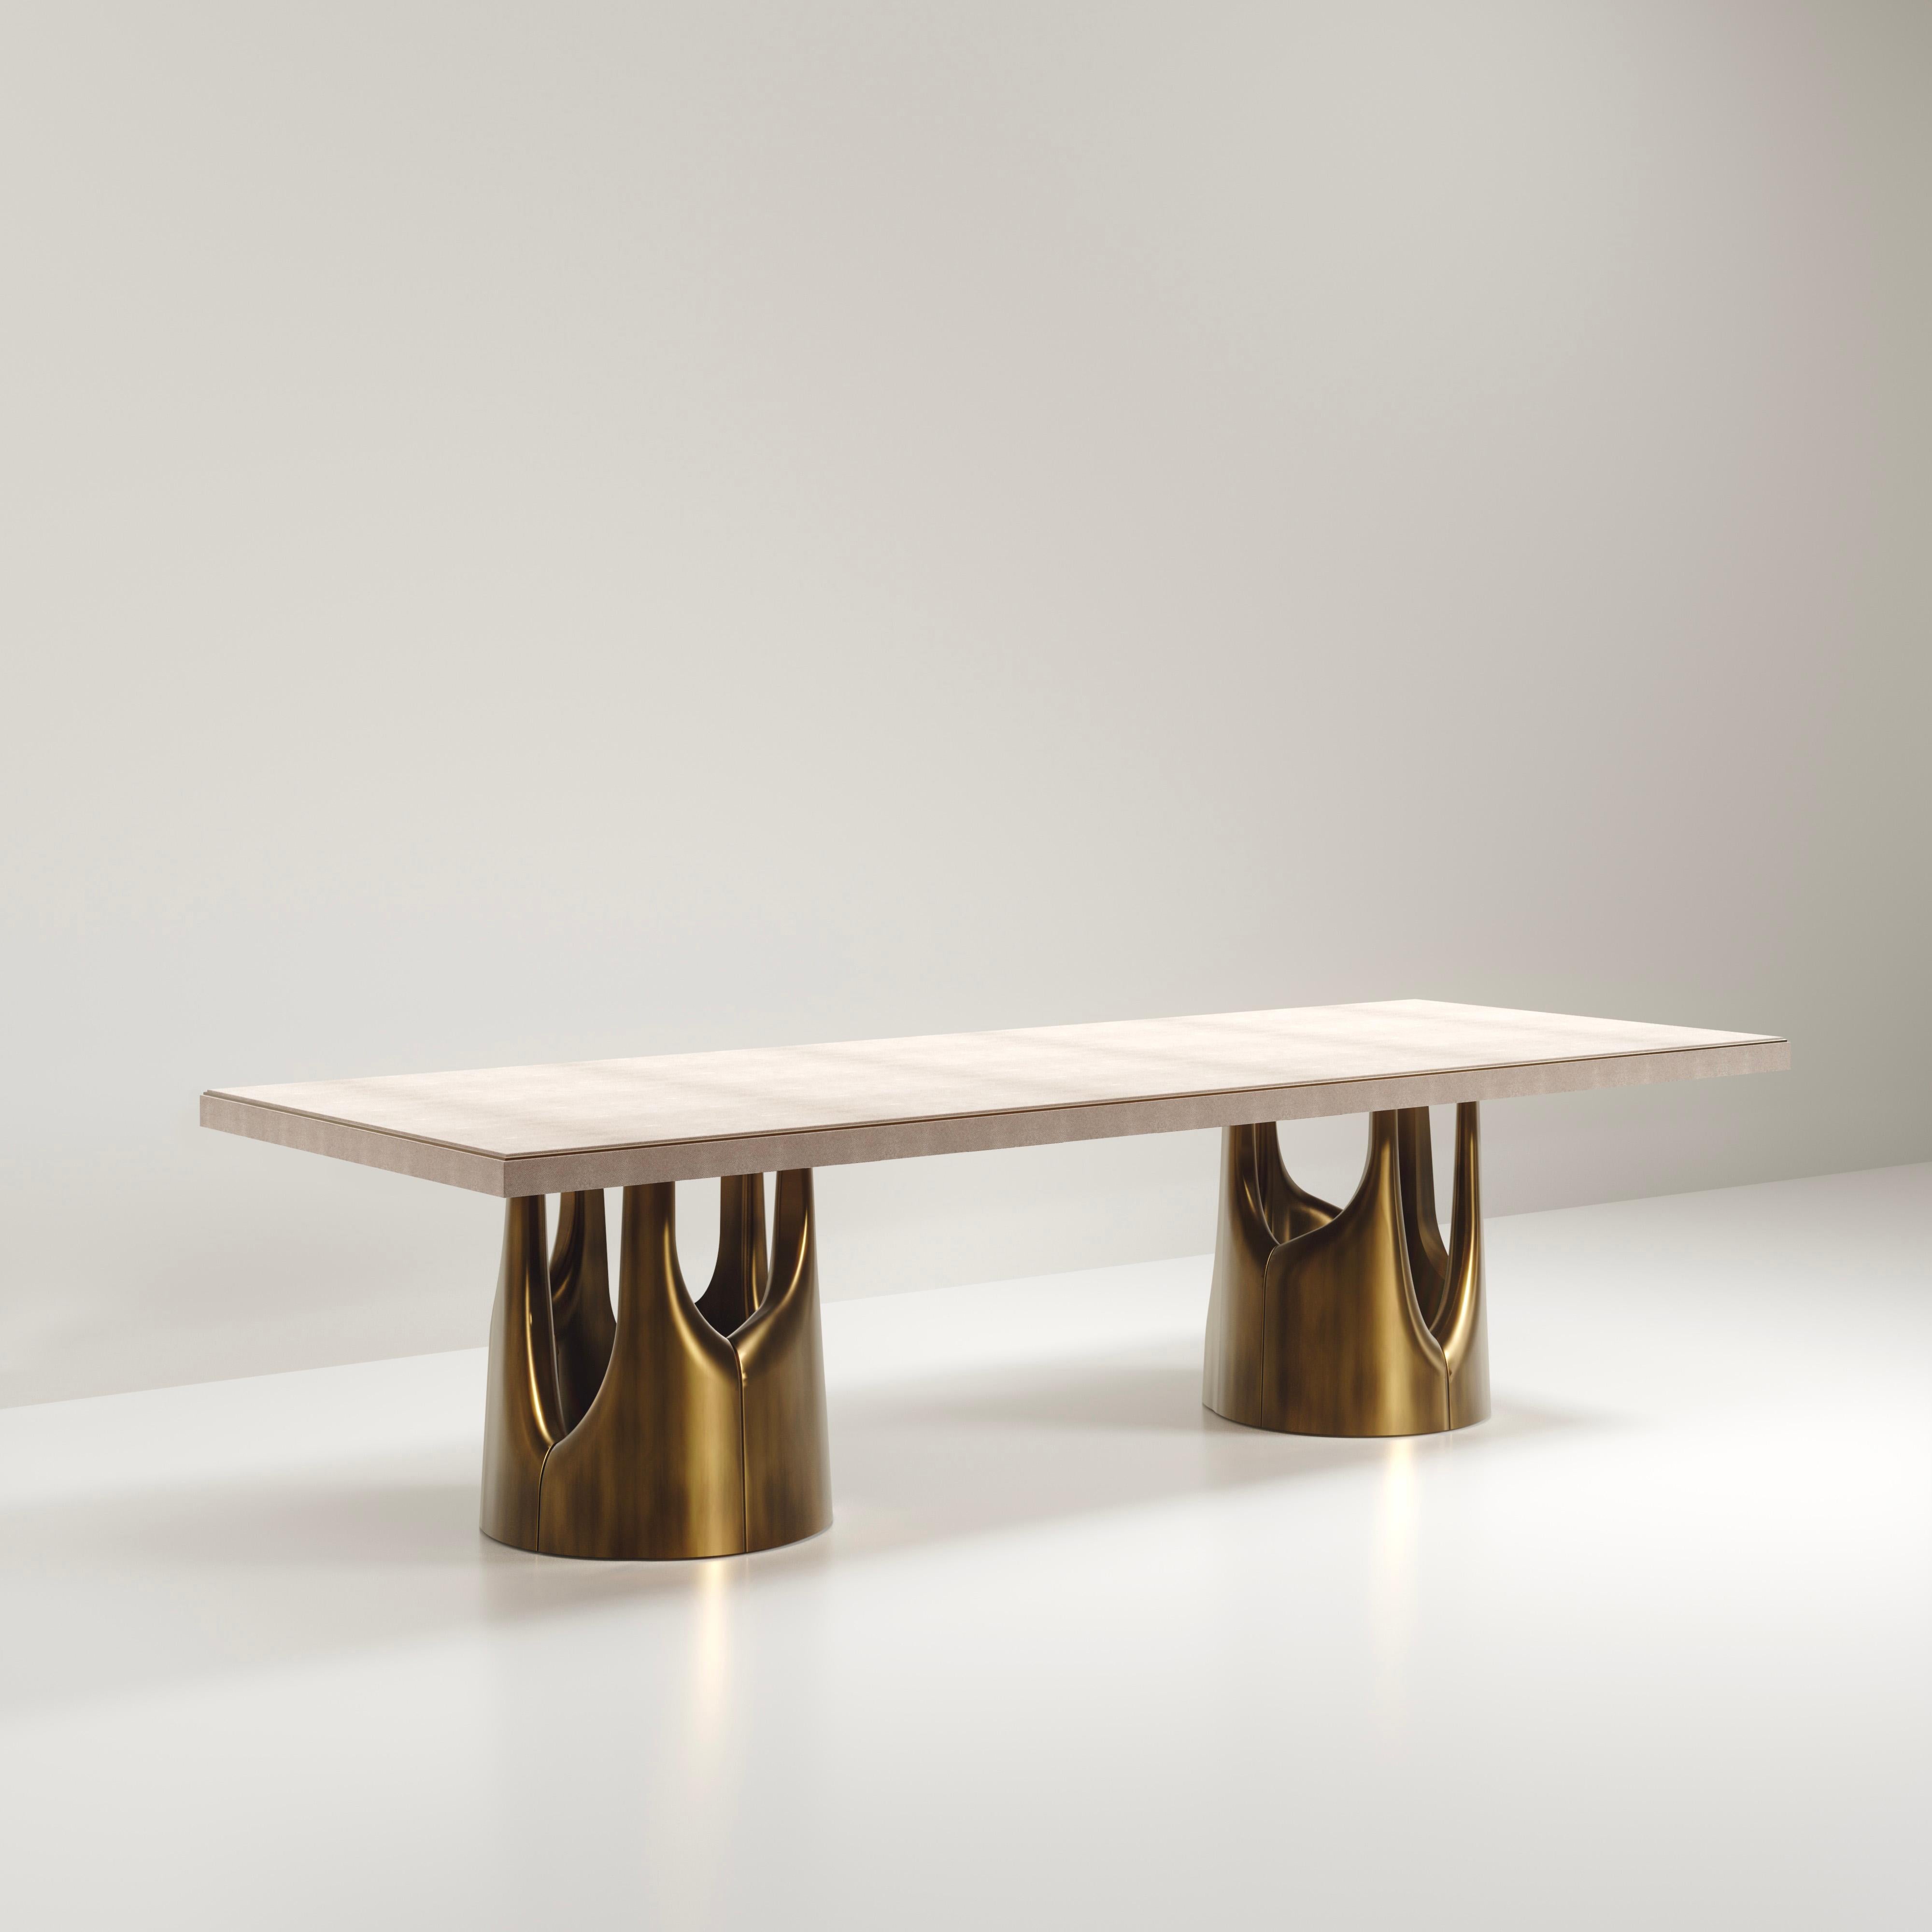 The Triptych I dining table by R&Y Augousti is a stunning multi-faceted sculptural piece. The beautiful hand craved details on the bronze-patina base demonstrate the incredible artisan work of Augousti. The top is inlaid in cream shagreen. Available